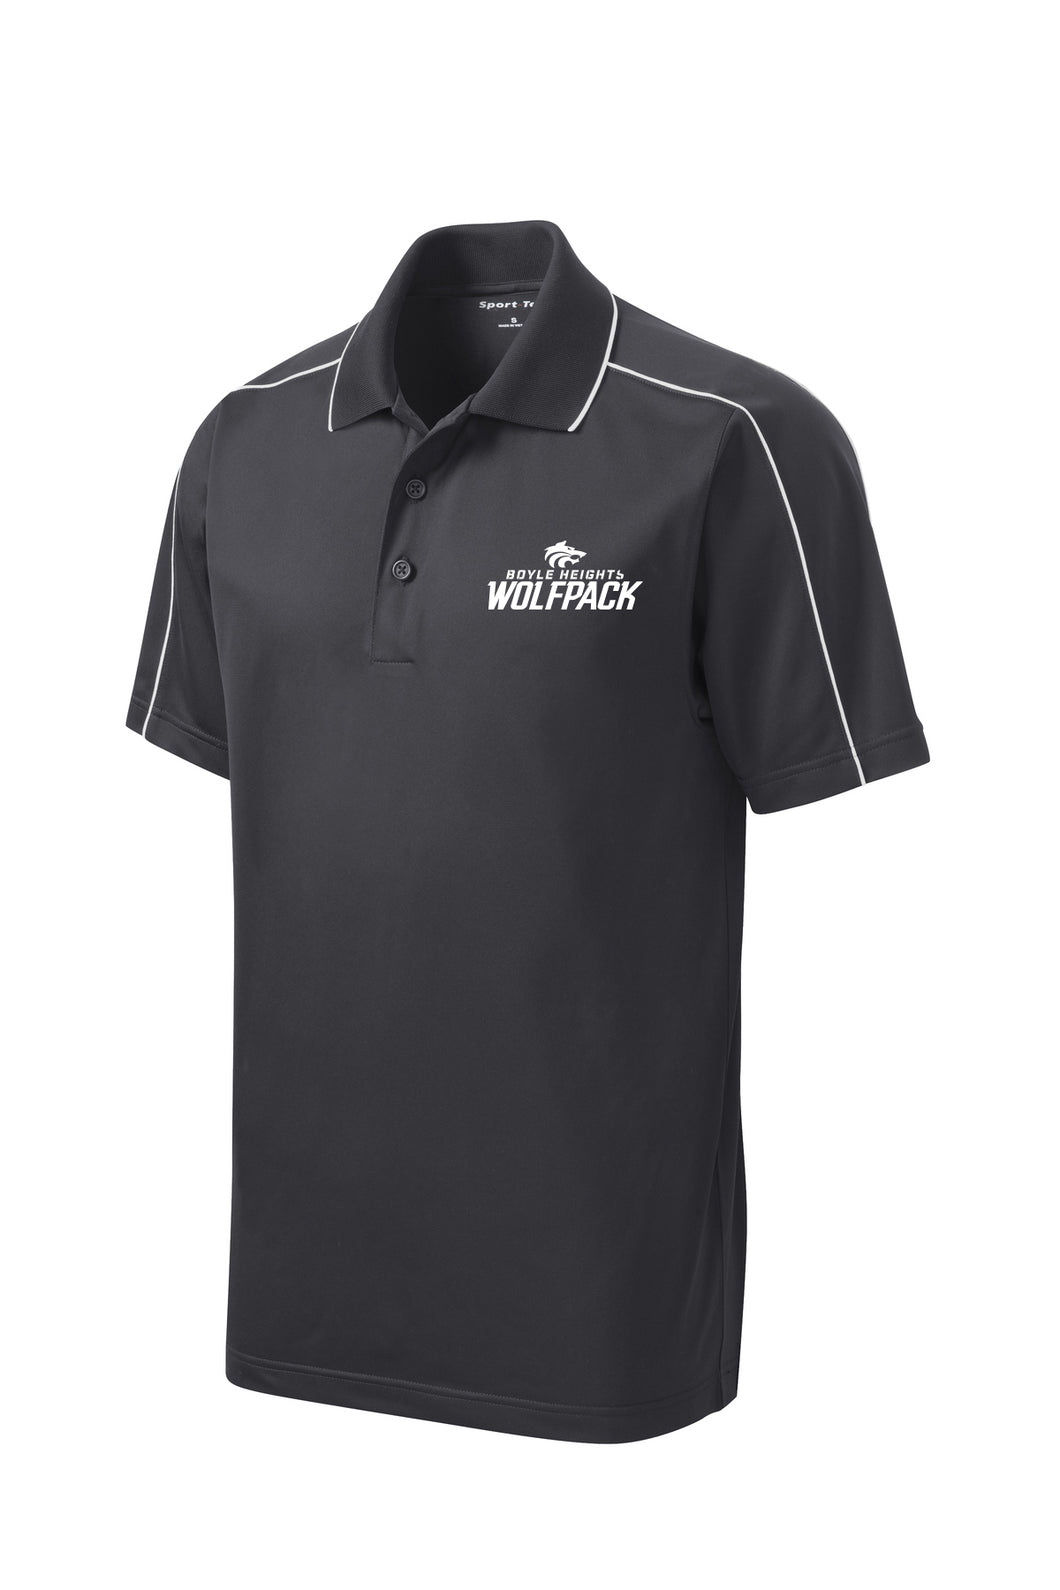 WOLFPACK POLO 2023 - CHARCOAL WITH WHITE TRIM - USA SIZES